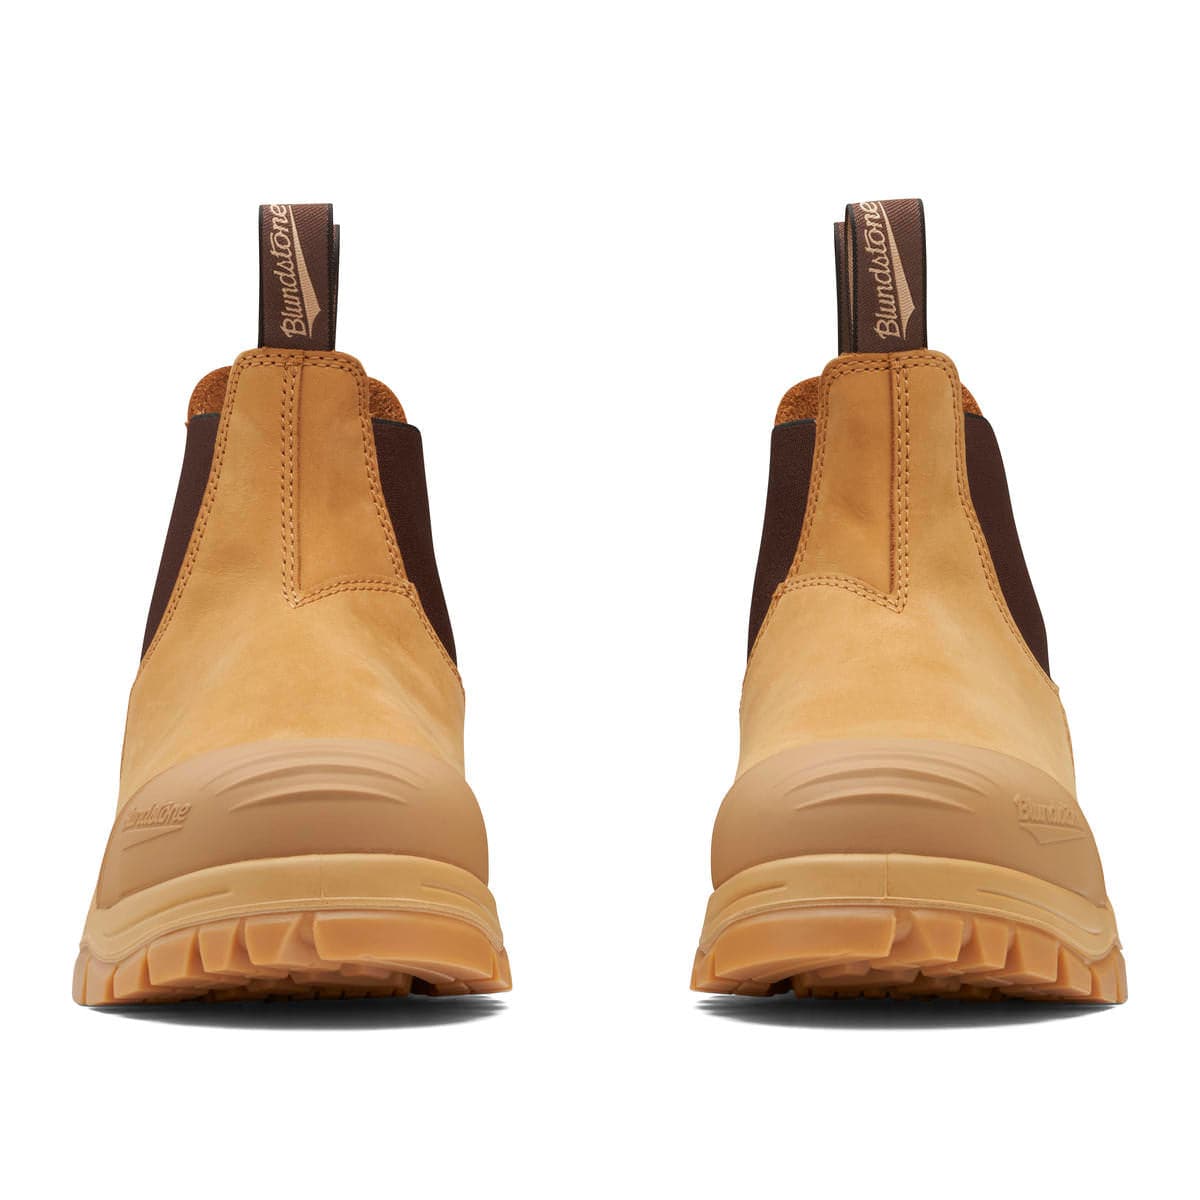 Blundstone Unisex Elastic Side Series - Slip on Safety Boots - Wheat #989